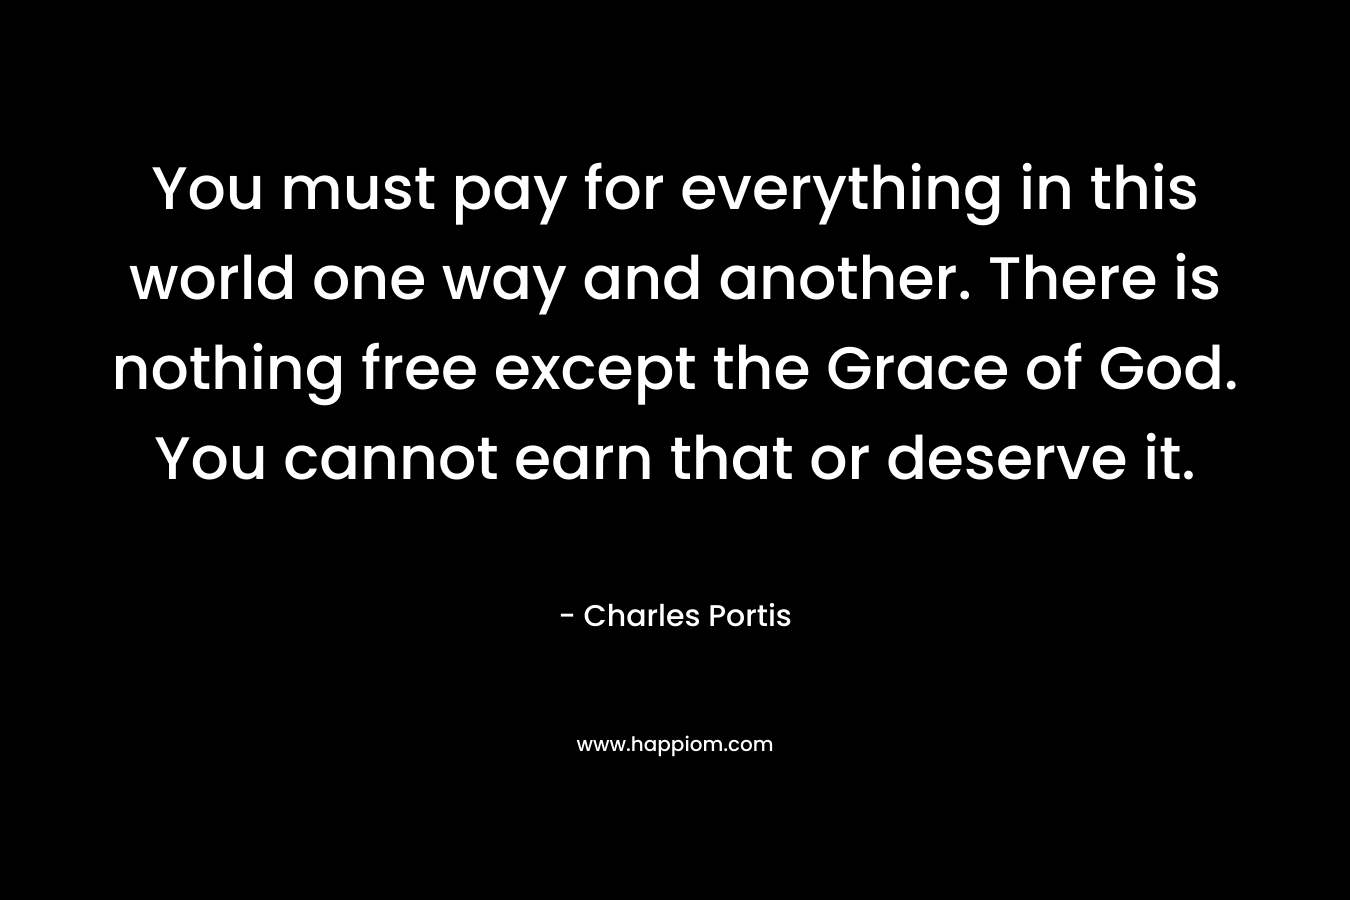 You must pay for everything in this world one way and another. There is nothing free except the Grace of God. You cannot earn that or deserve it.